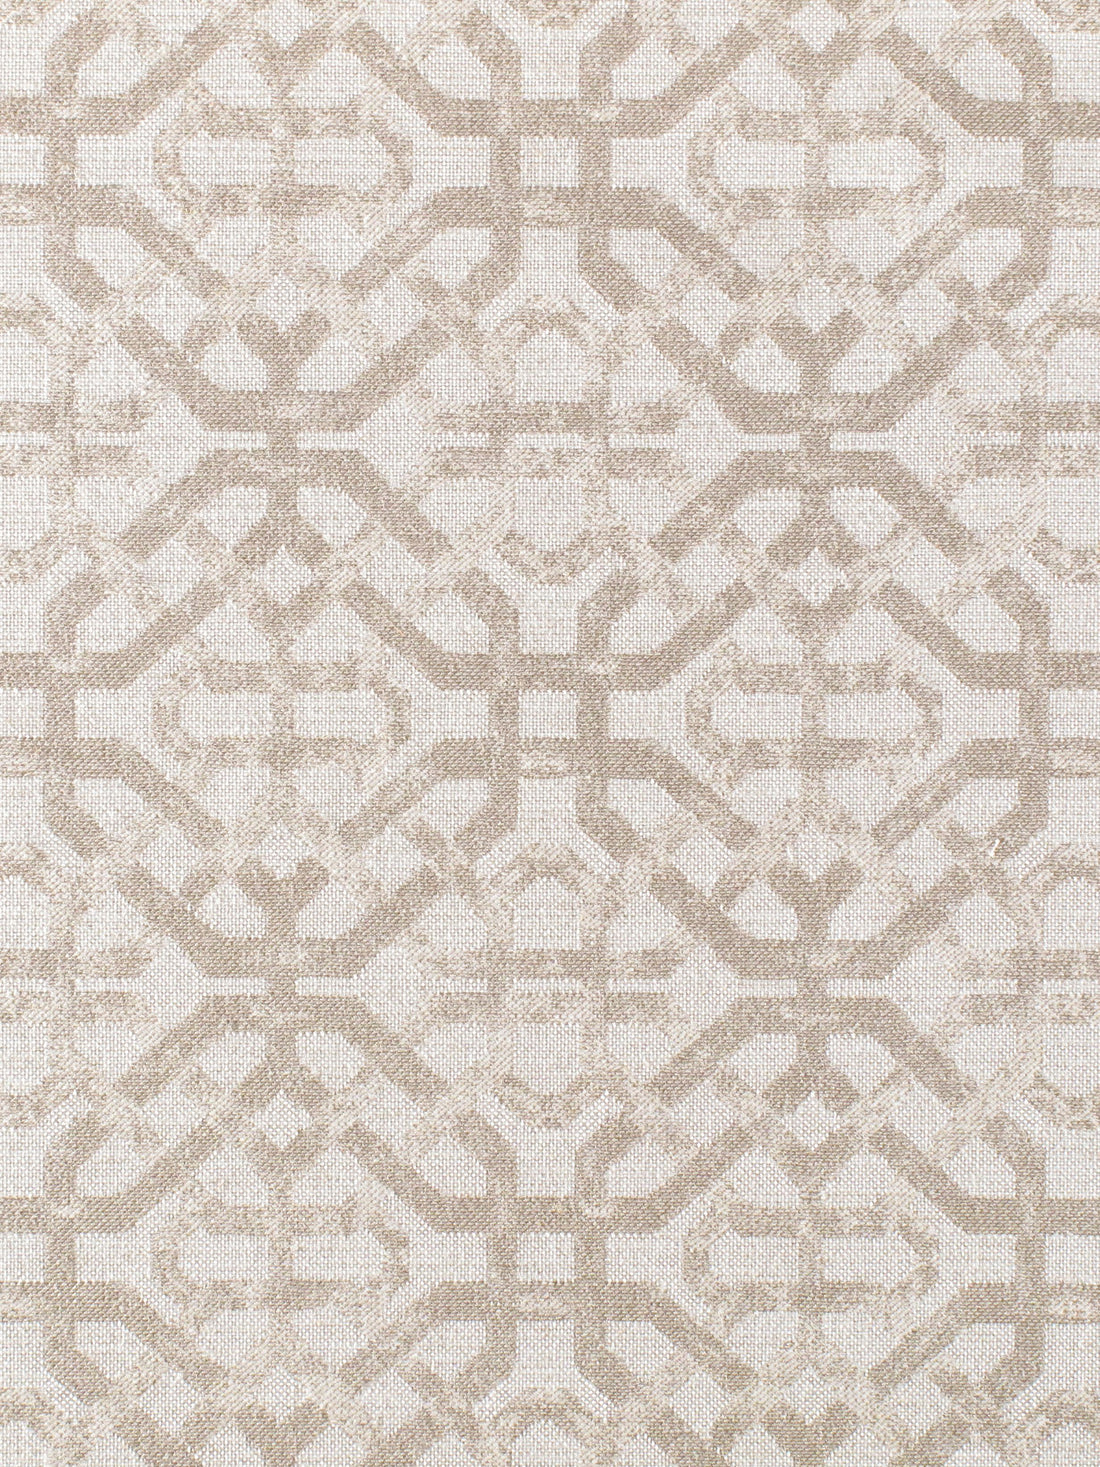 Porta Fregio fabric in driftwood color - pattern number N3 00043133 - by Scalamandre in the Old World Weavers collection